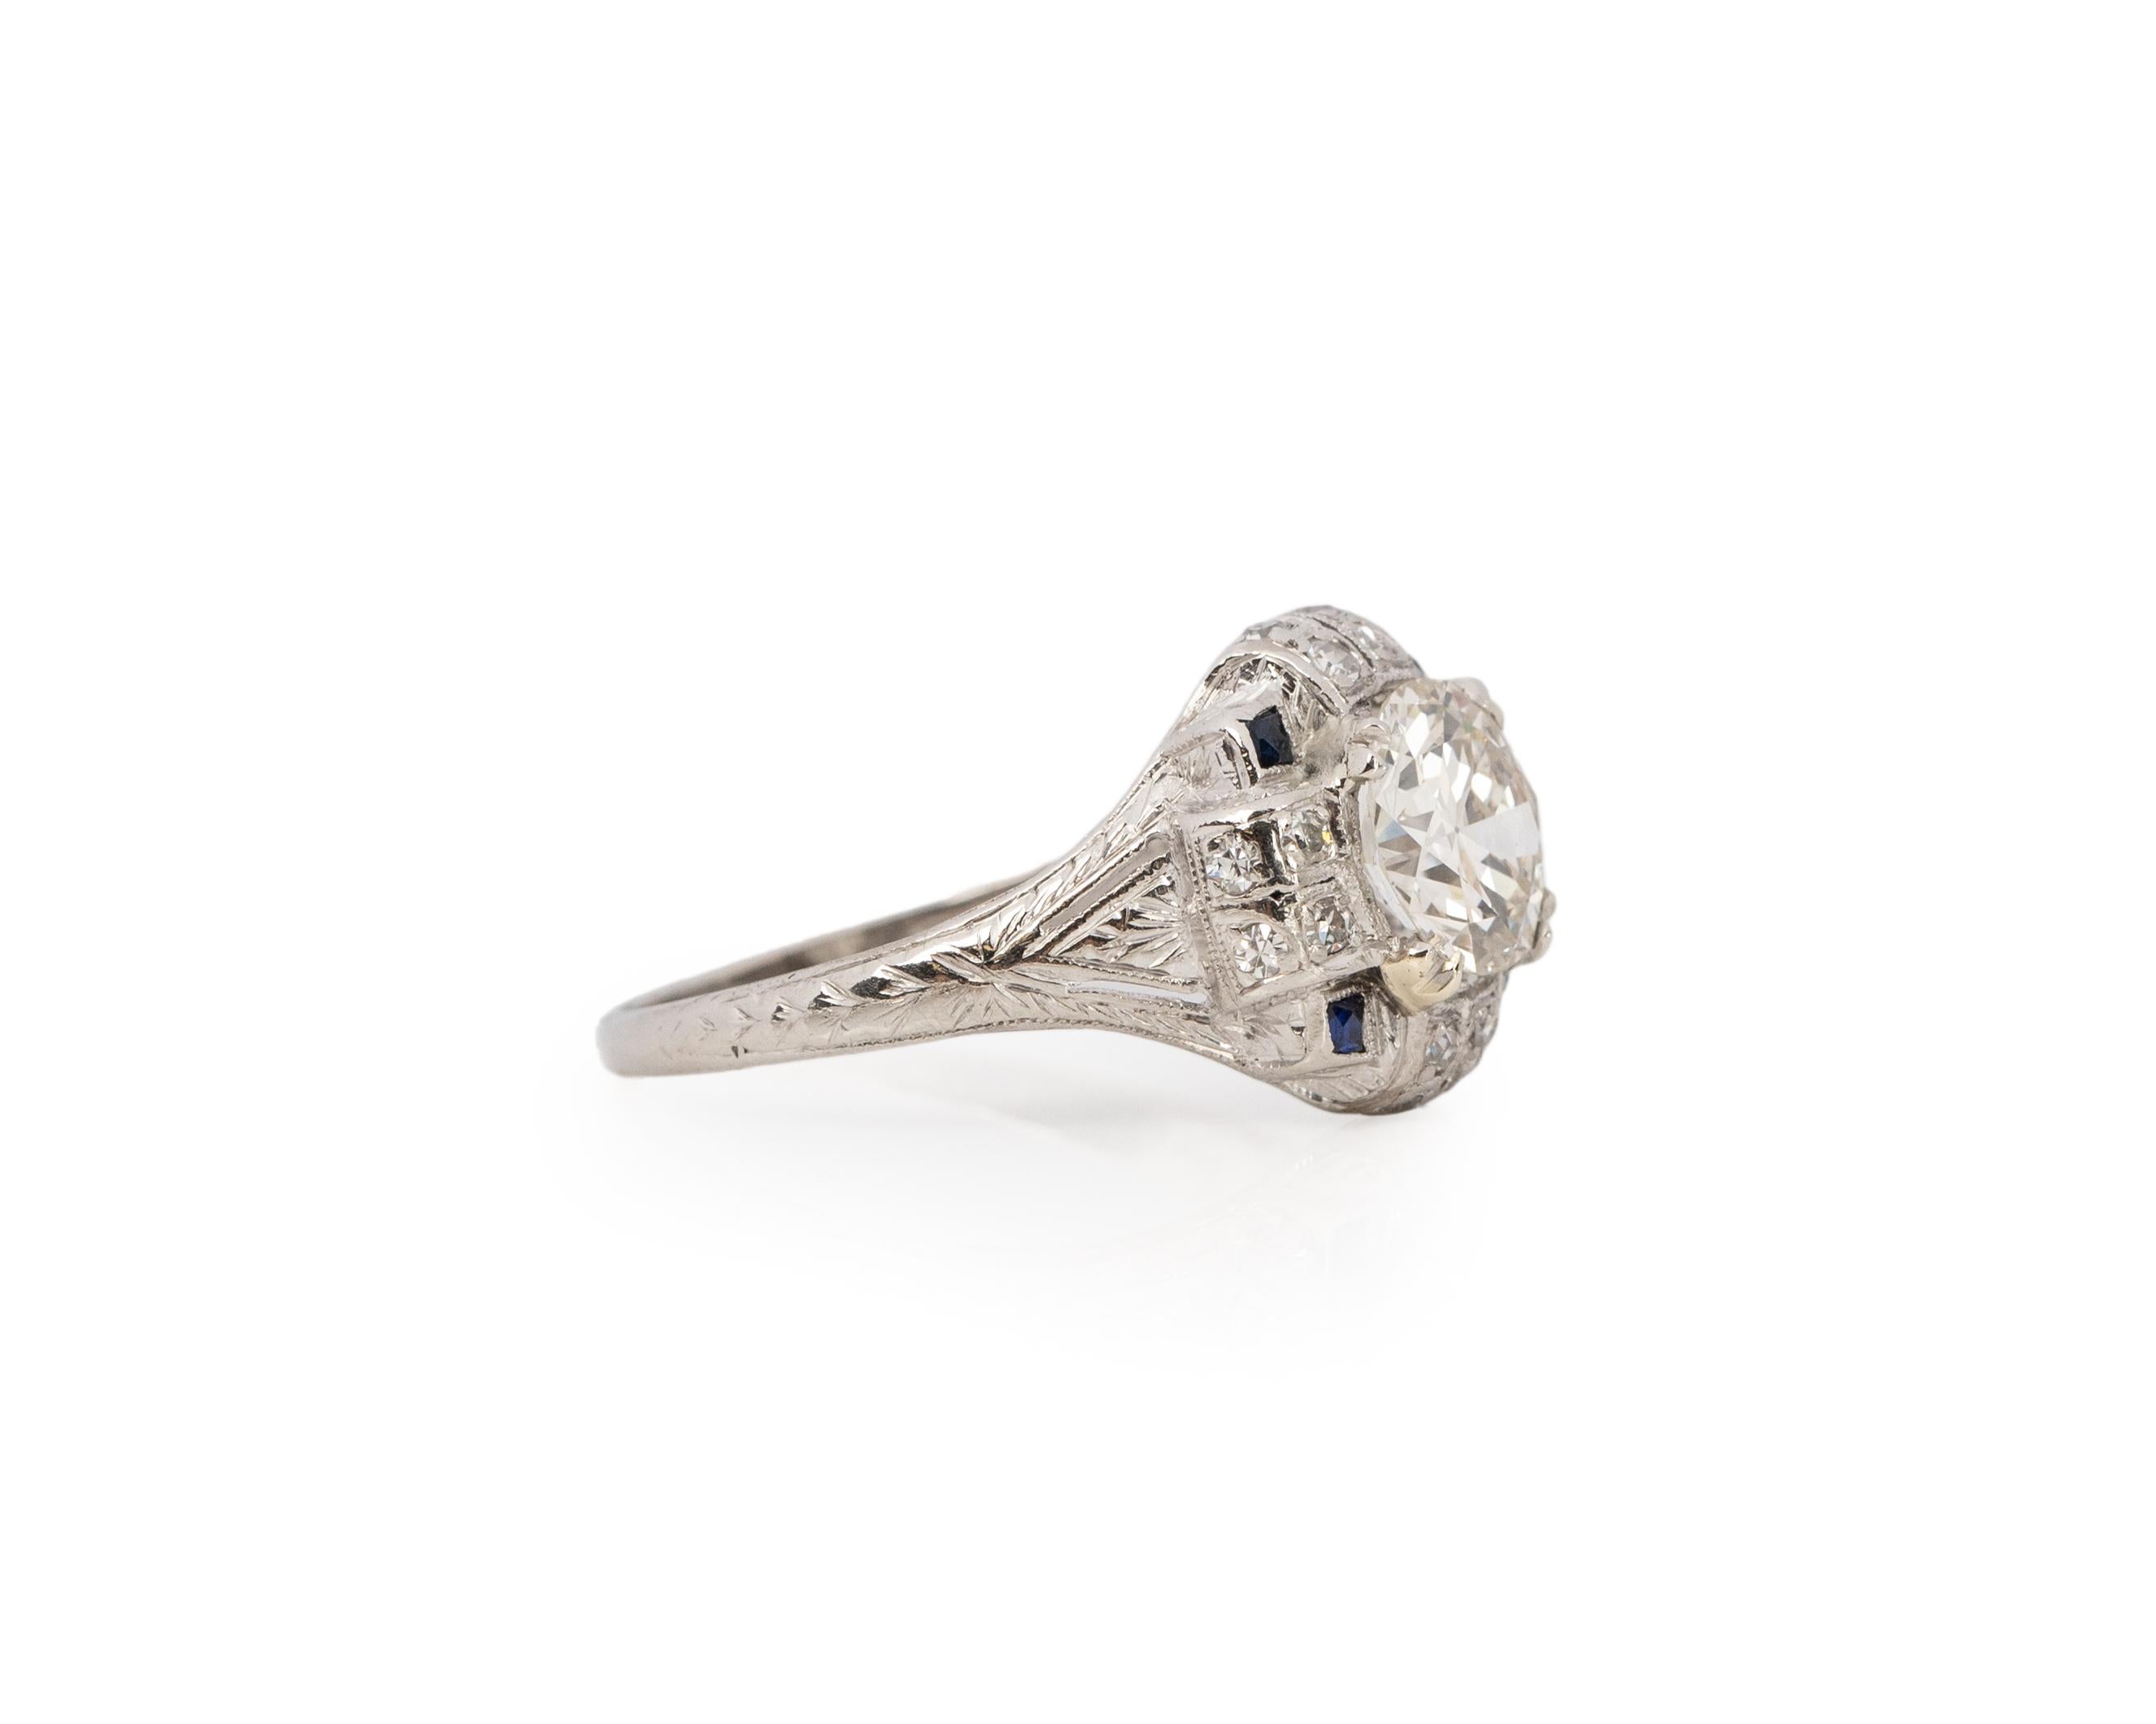 Ring Size: 8
Metal Type: Platinum [Hallmarked, and Tested]
Weight: 4.4grams

Center Diamond Details:
GIA LAB REPORT #:5221848949
Weight: 1.57ct
Cut: Old European brilliant
Color: K
Clarity: VS2
Measurements: 7.86mm x 7.72mm x 4.31mm

Side Diamond